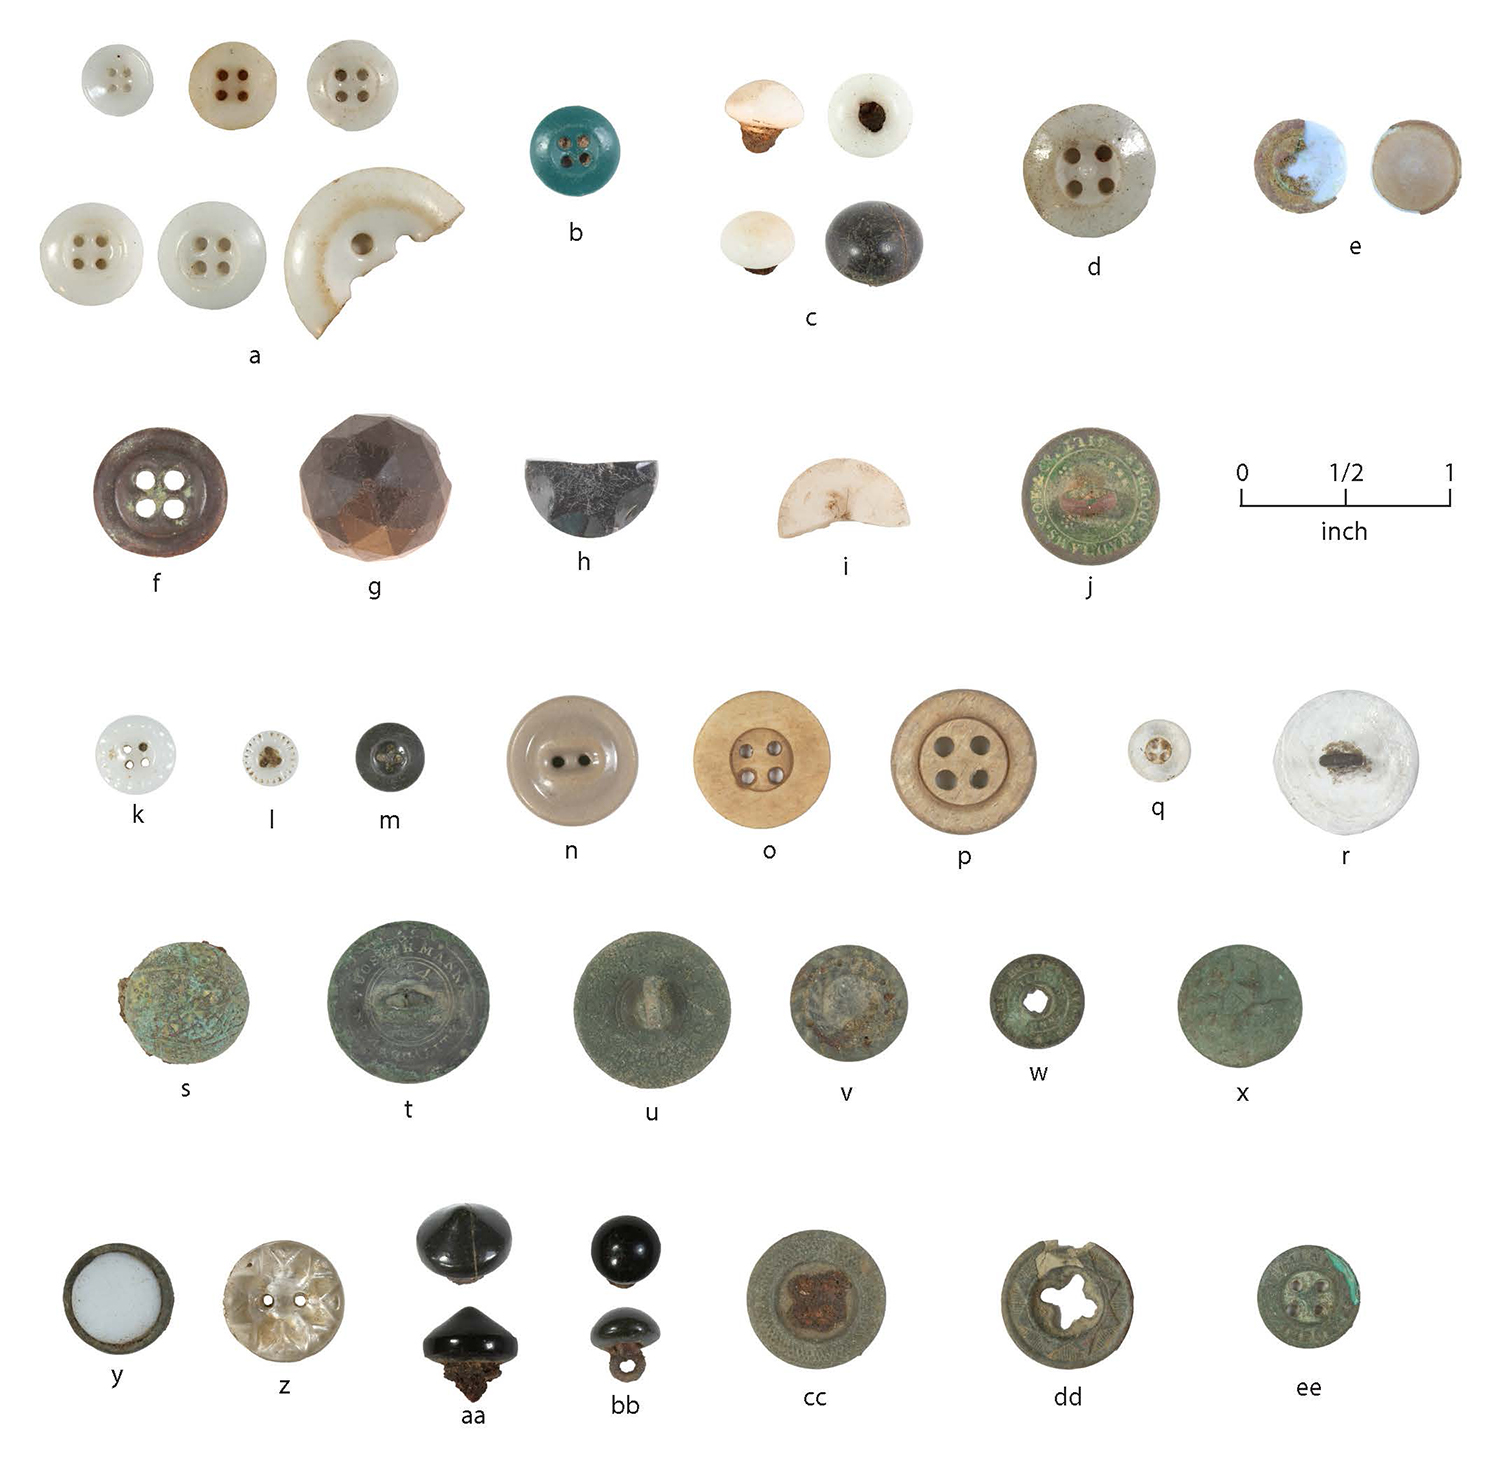 Dozens of buttons from the 19th century, on a white background with a scale bar.